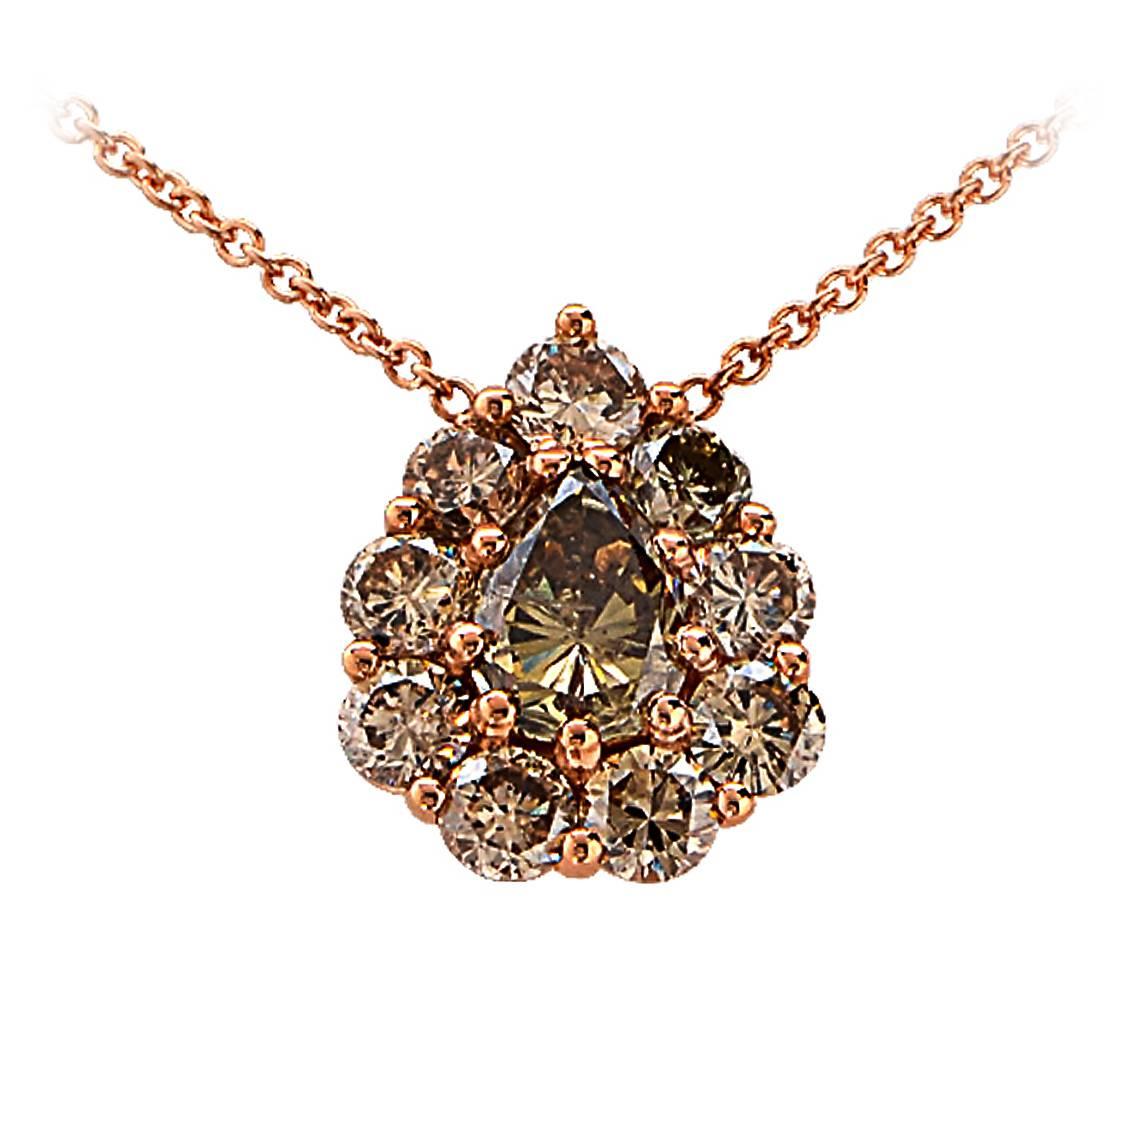 4.75 Carat Fancy Colored Diamond Gold Necklace For Sale